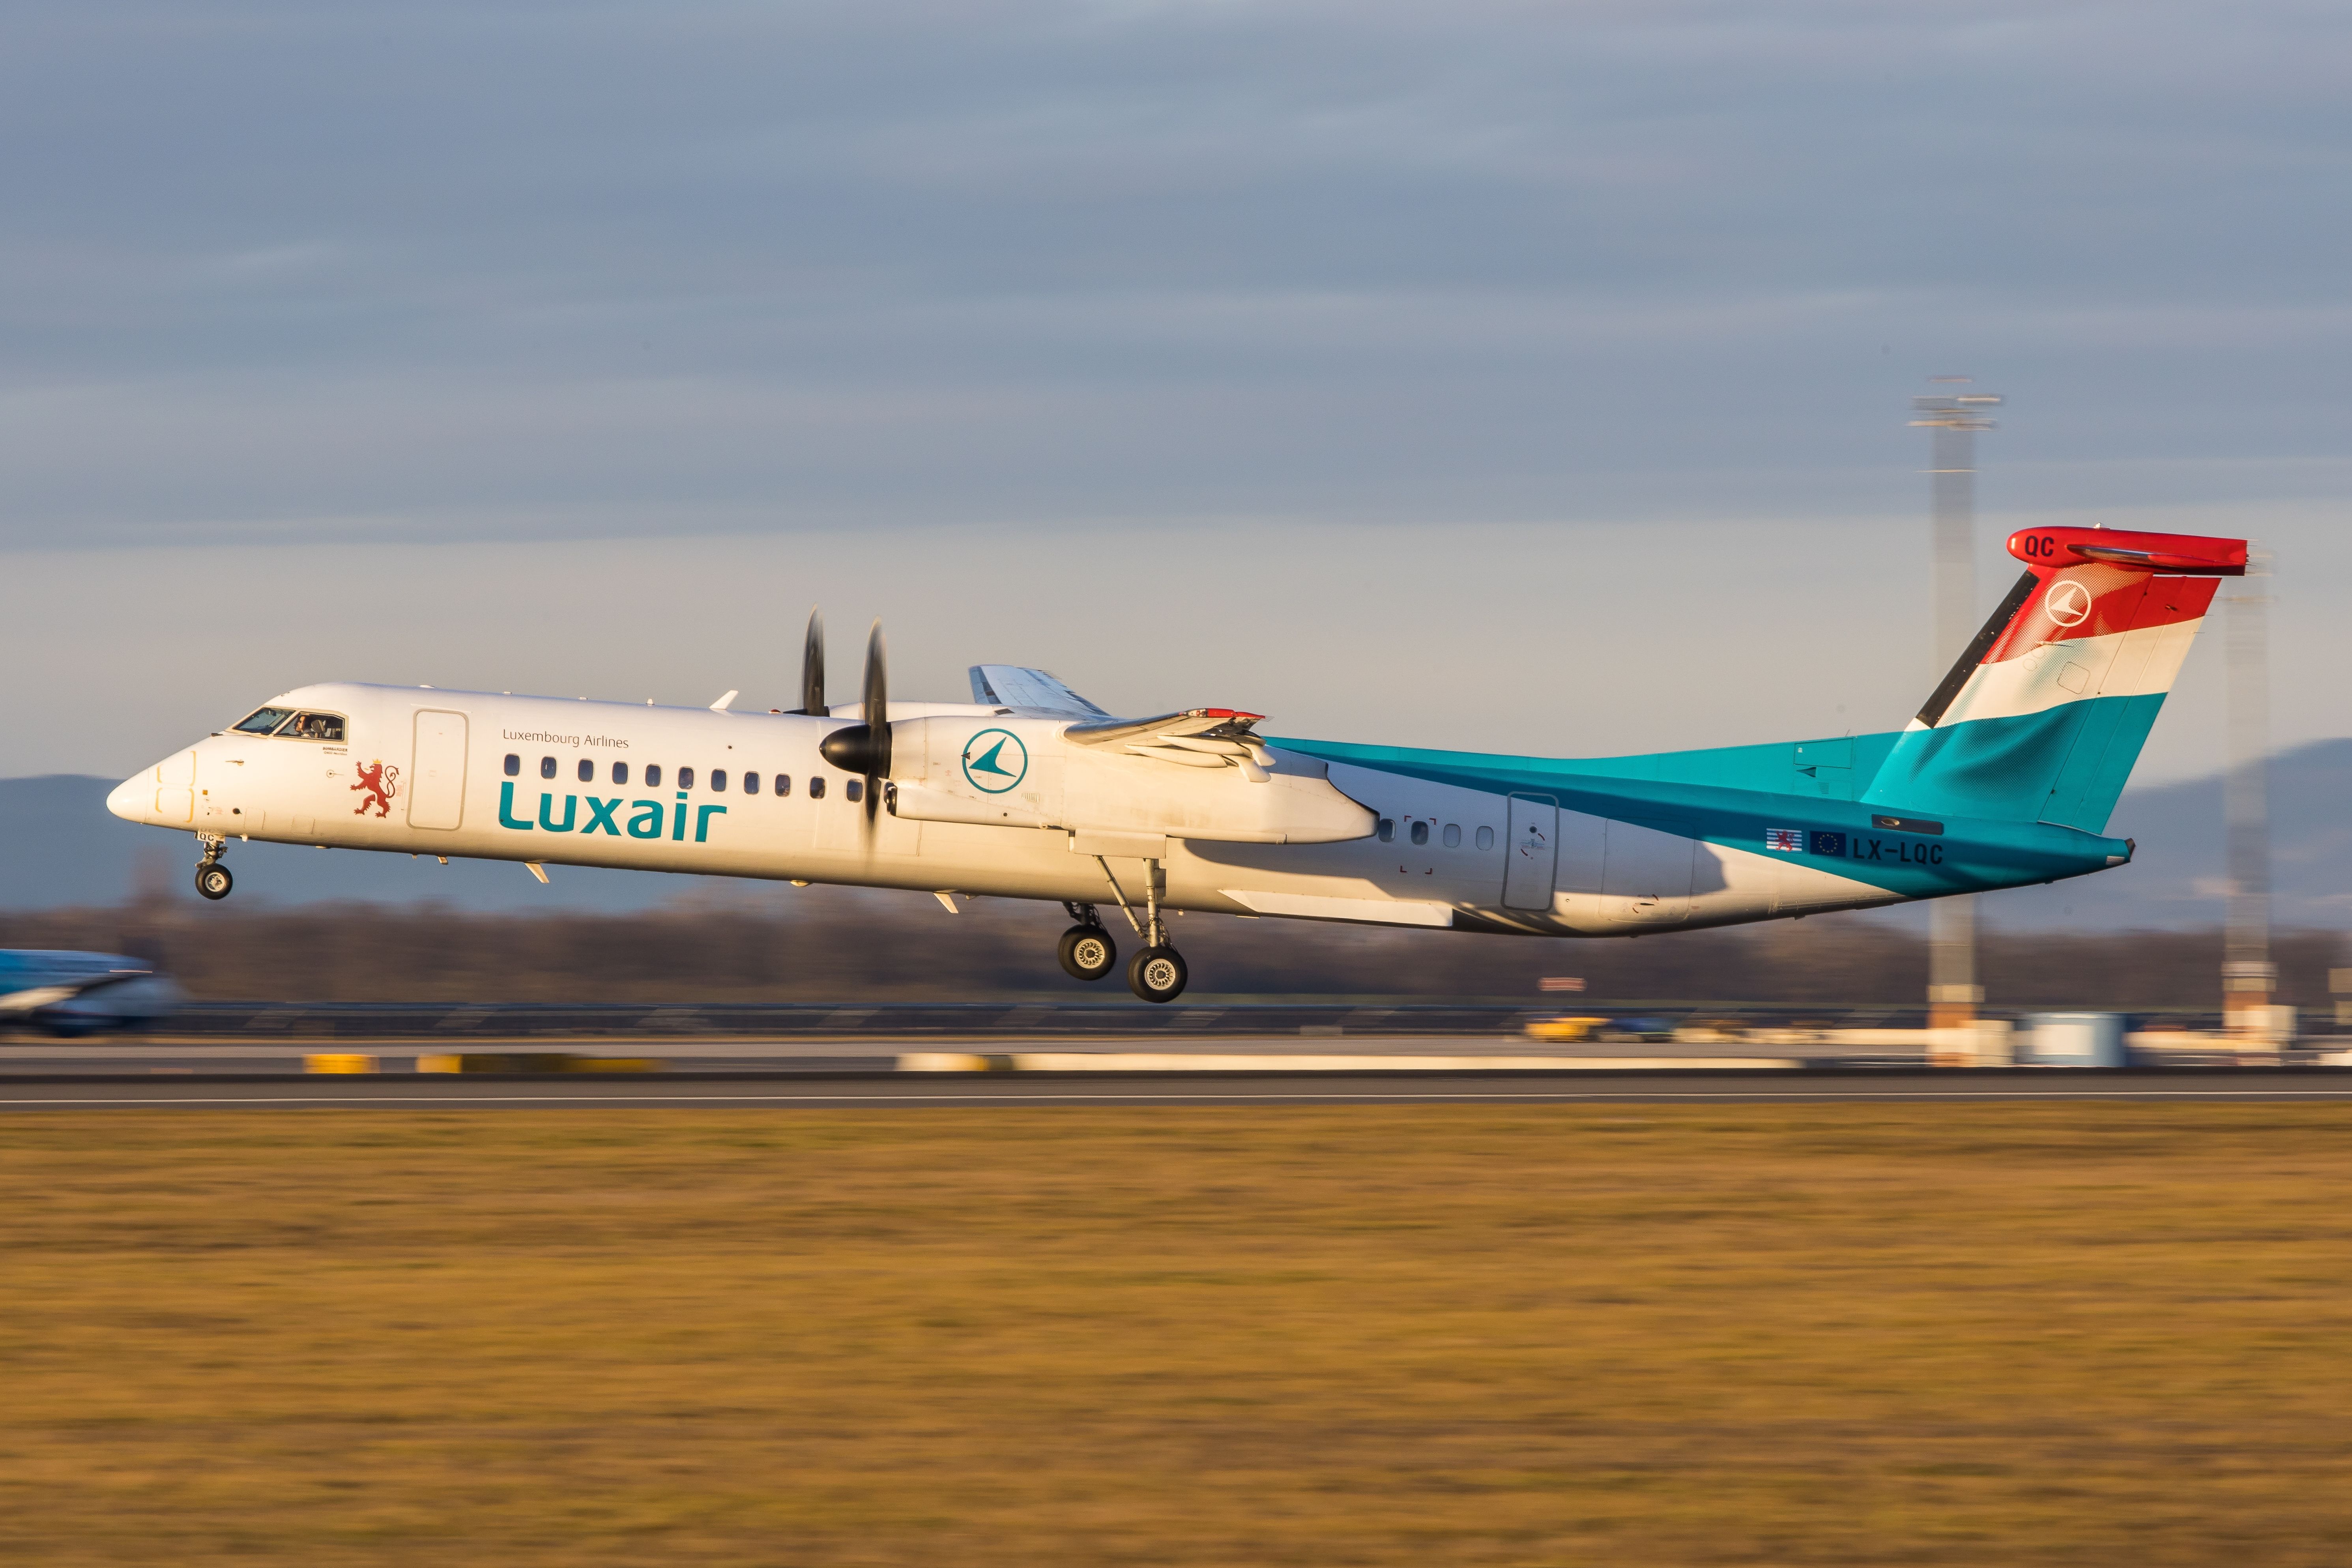 A Luxair Dash 8 about to land during sunrise.